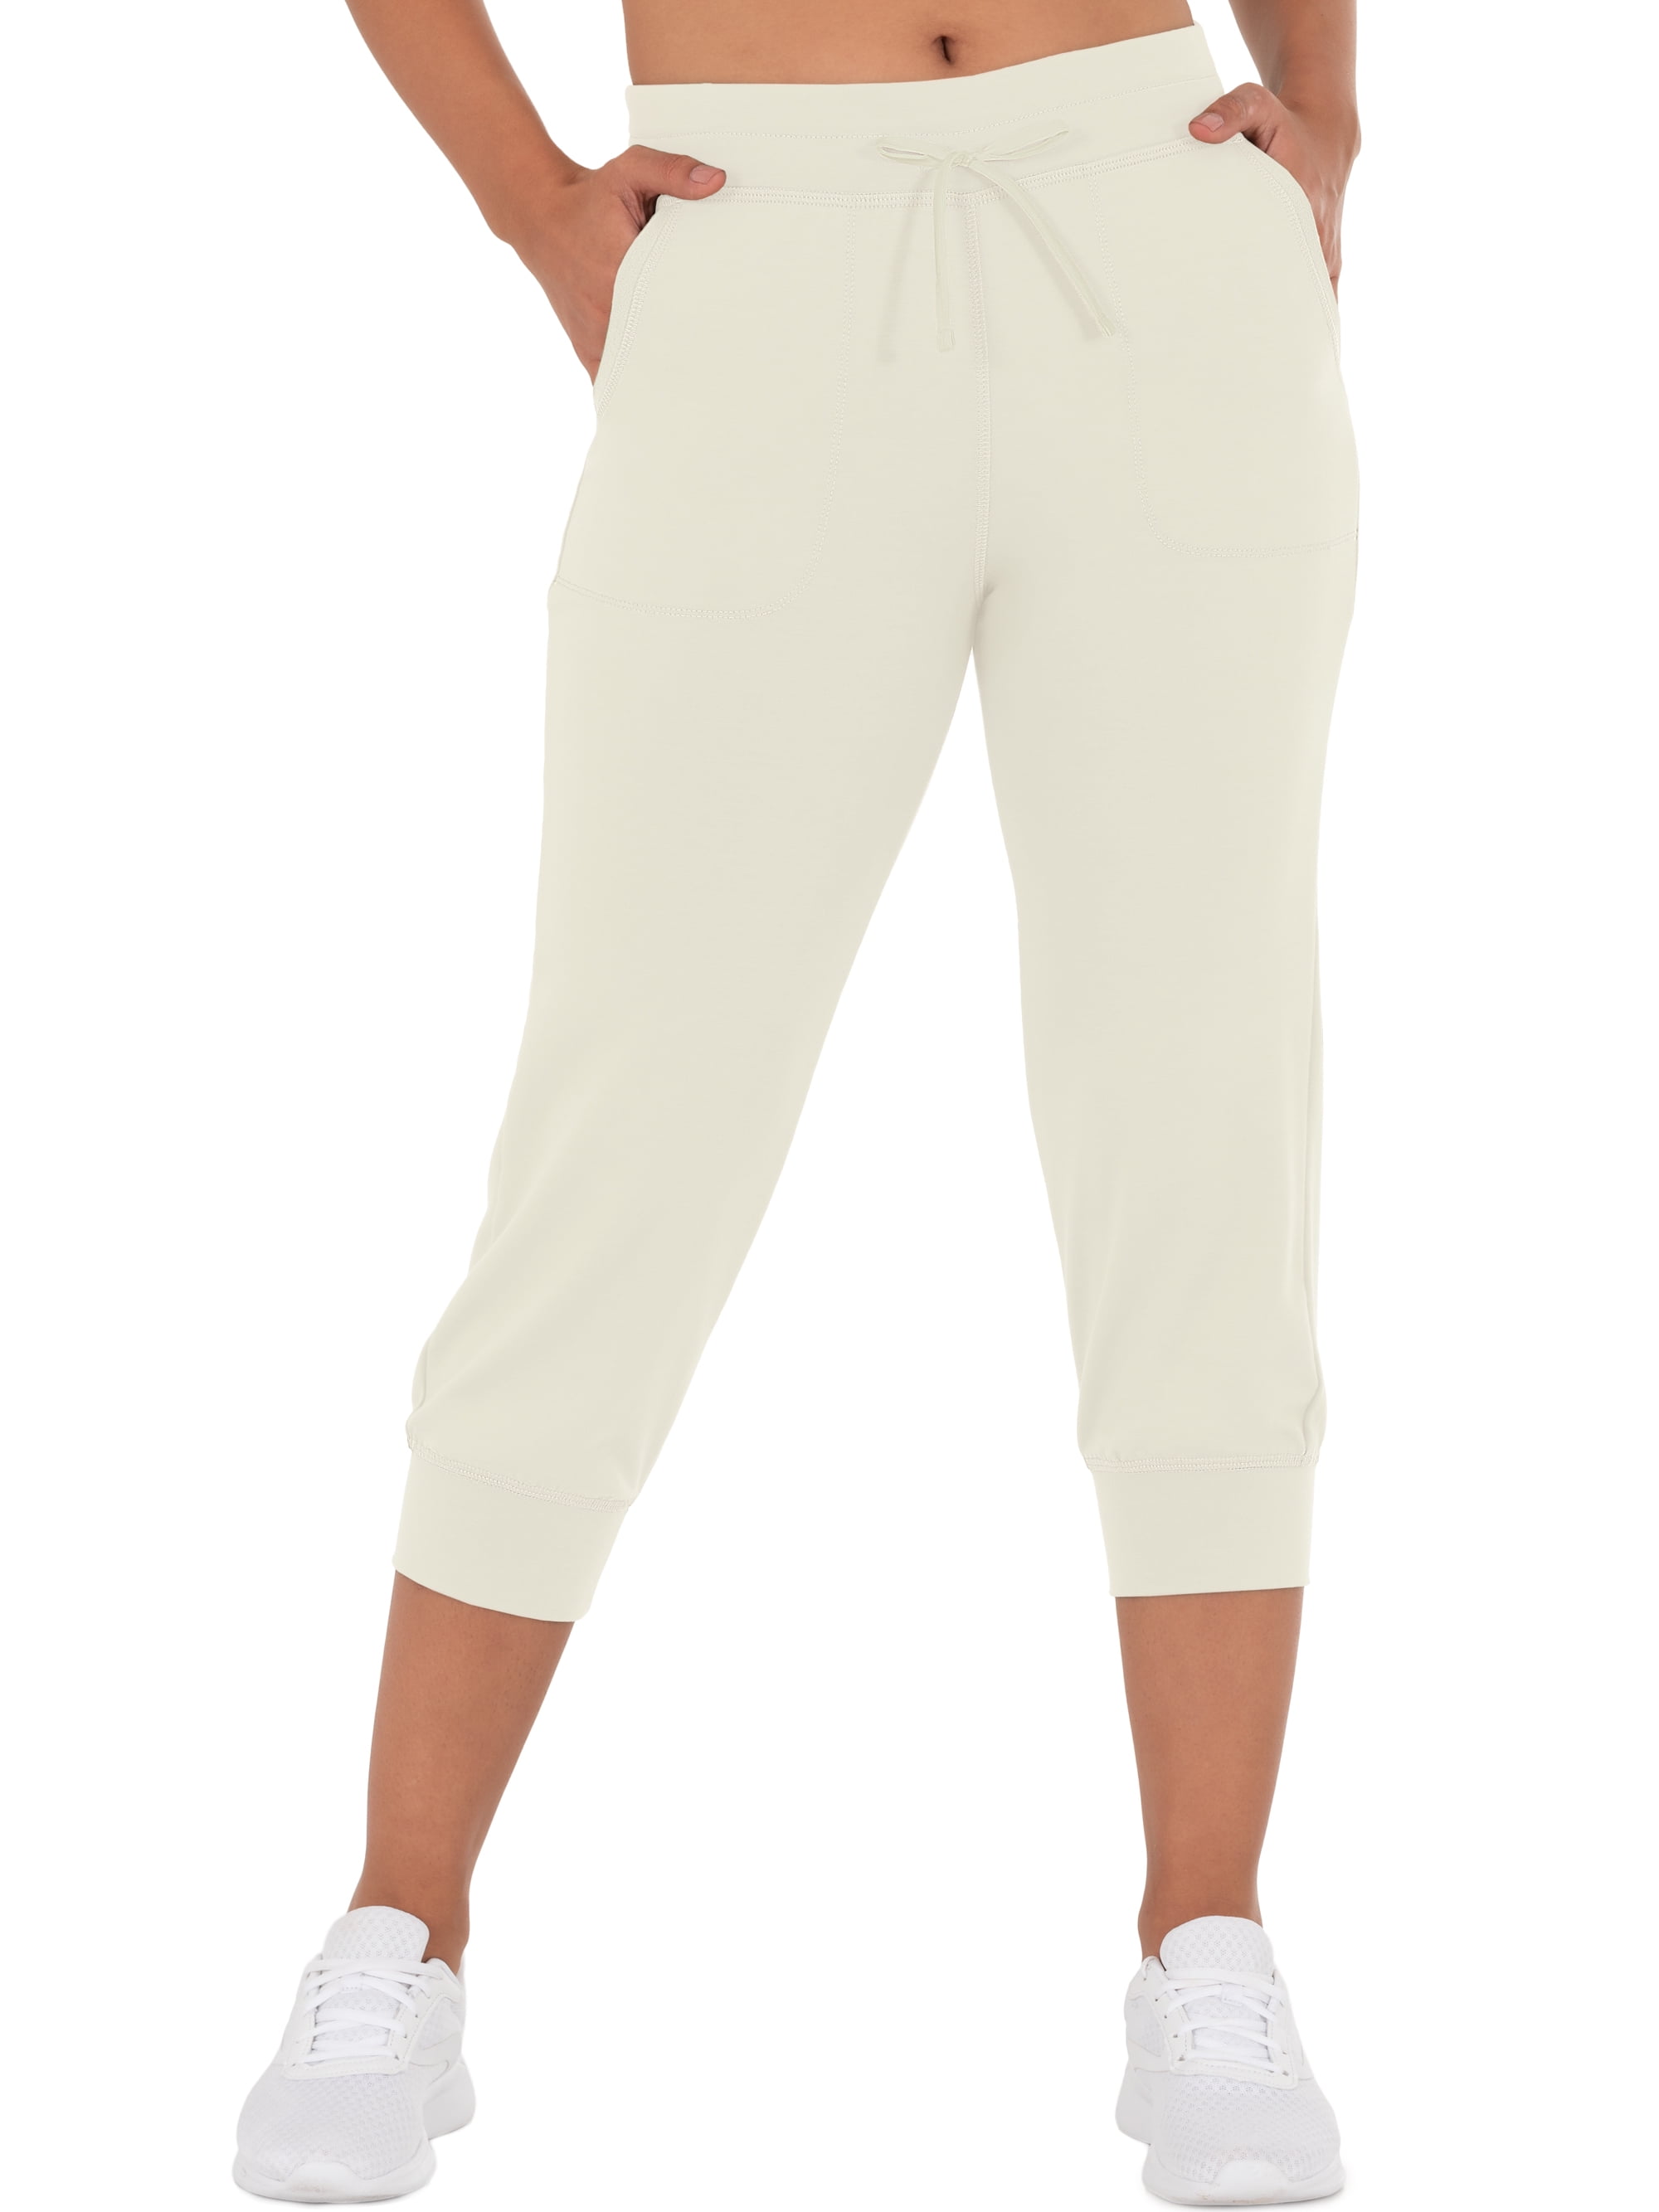 Athletic Works Women's French Terry Athleisure Capri Jogger Pants -  Walmart.com